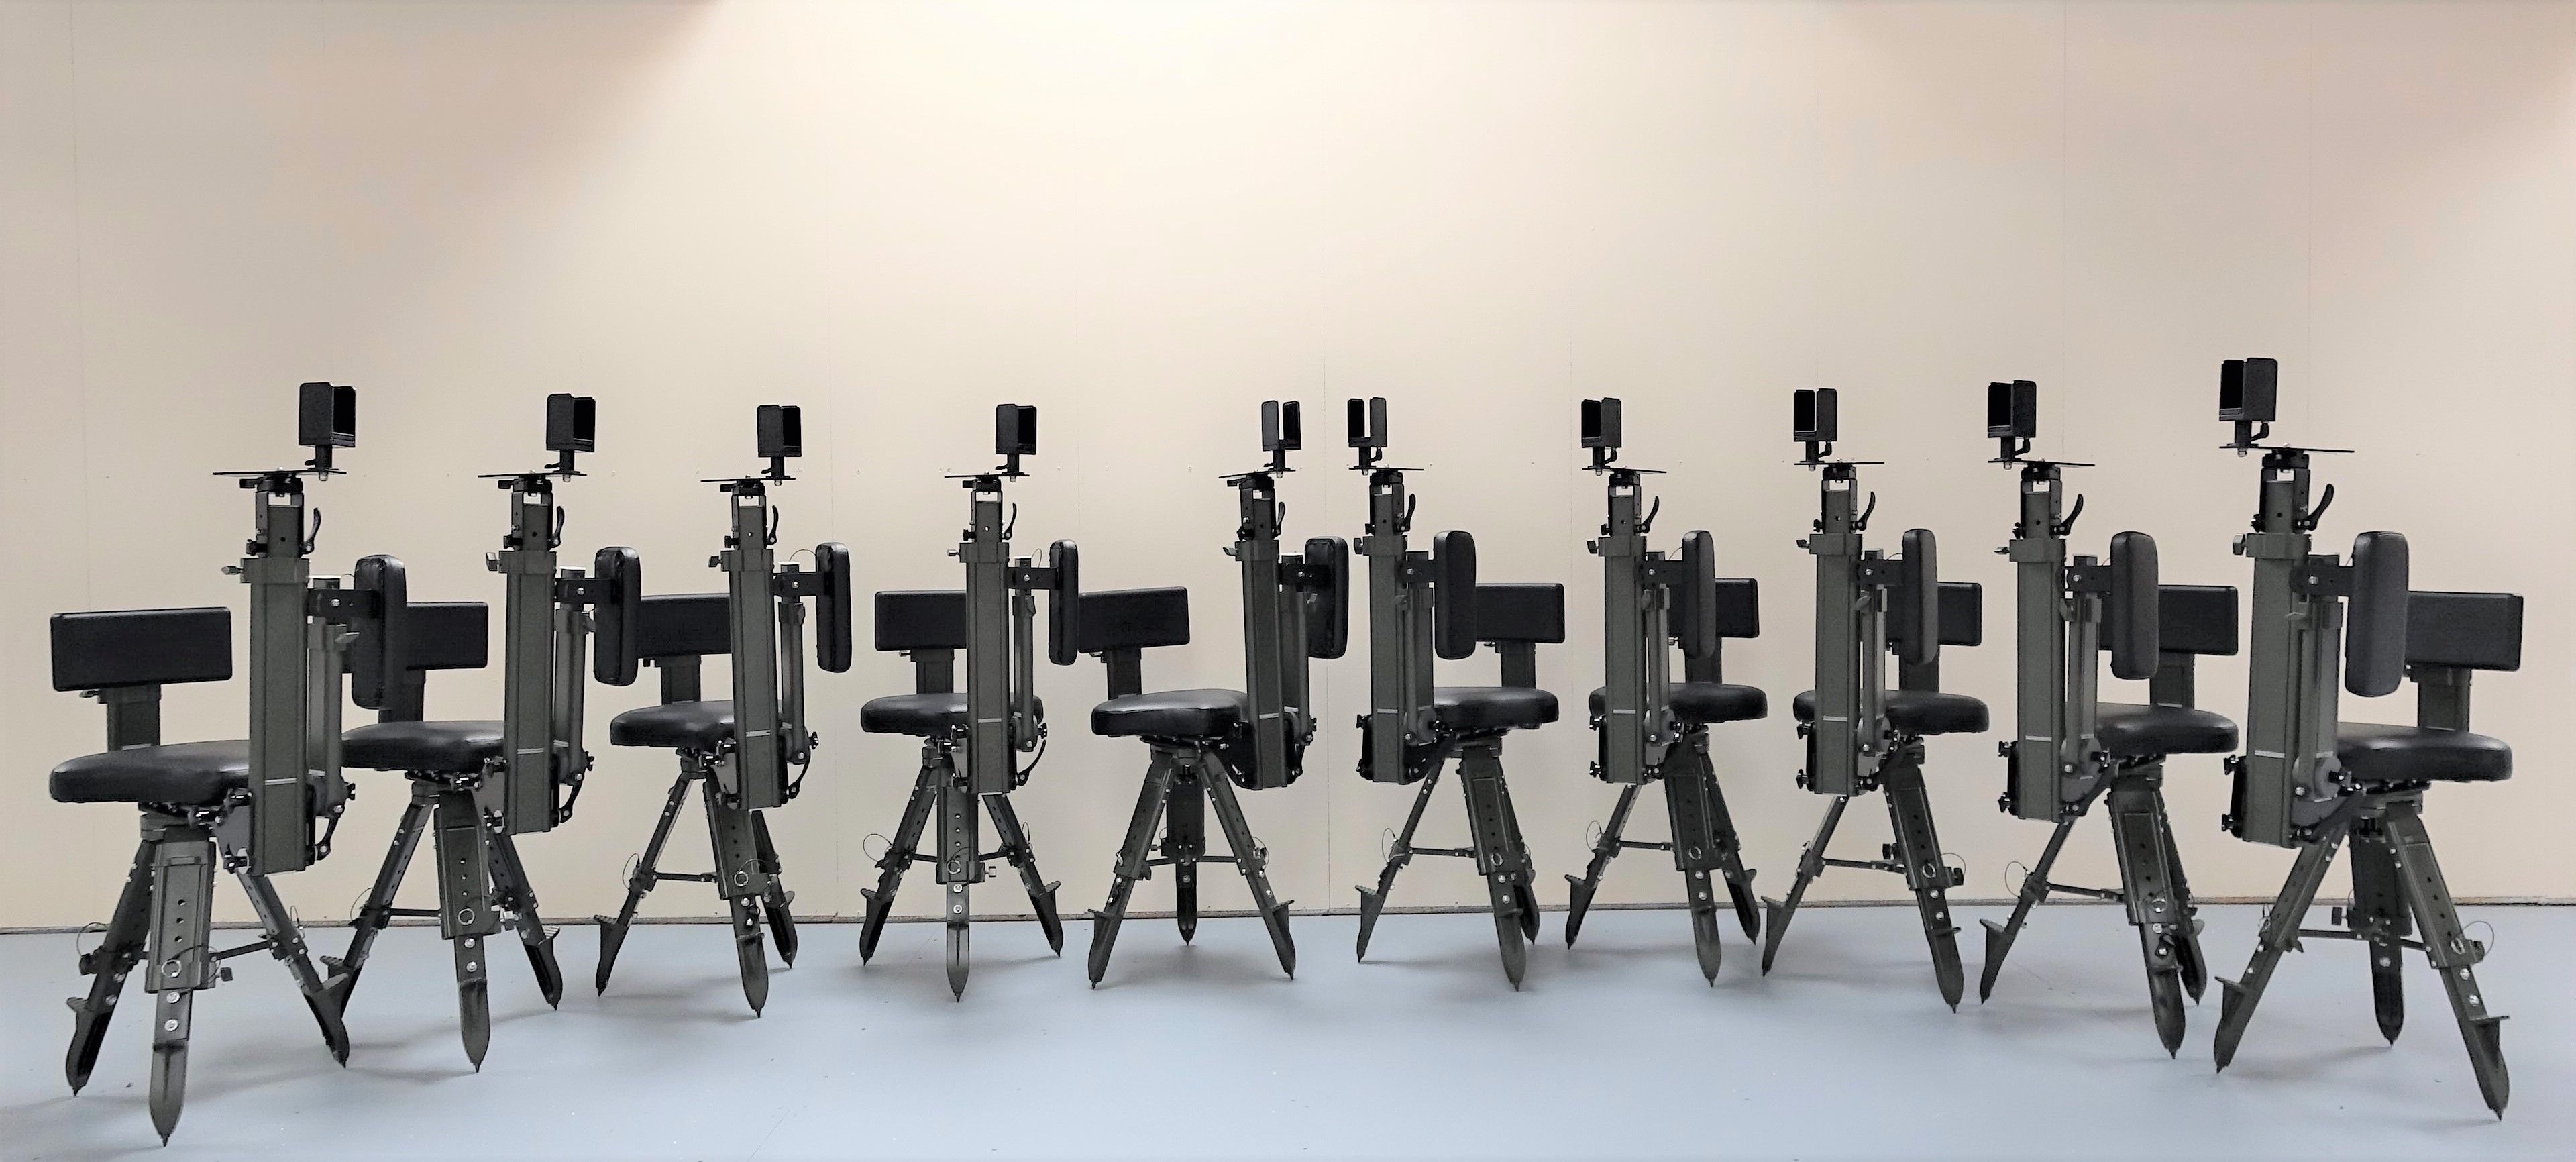 Idleback’s range of chairs were developed to enable a shooter or photographer to quickly turn throughout 360 degrees and shoot with accuracy. (Image Source: Idleback)